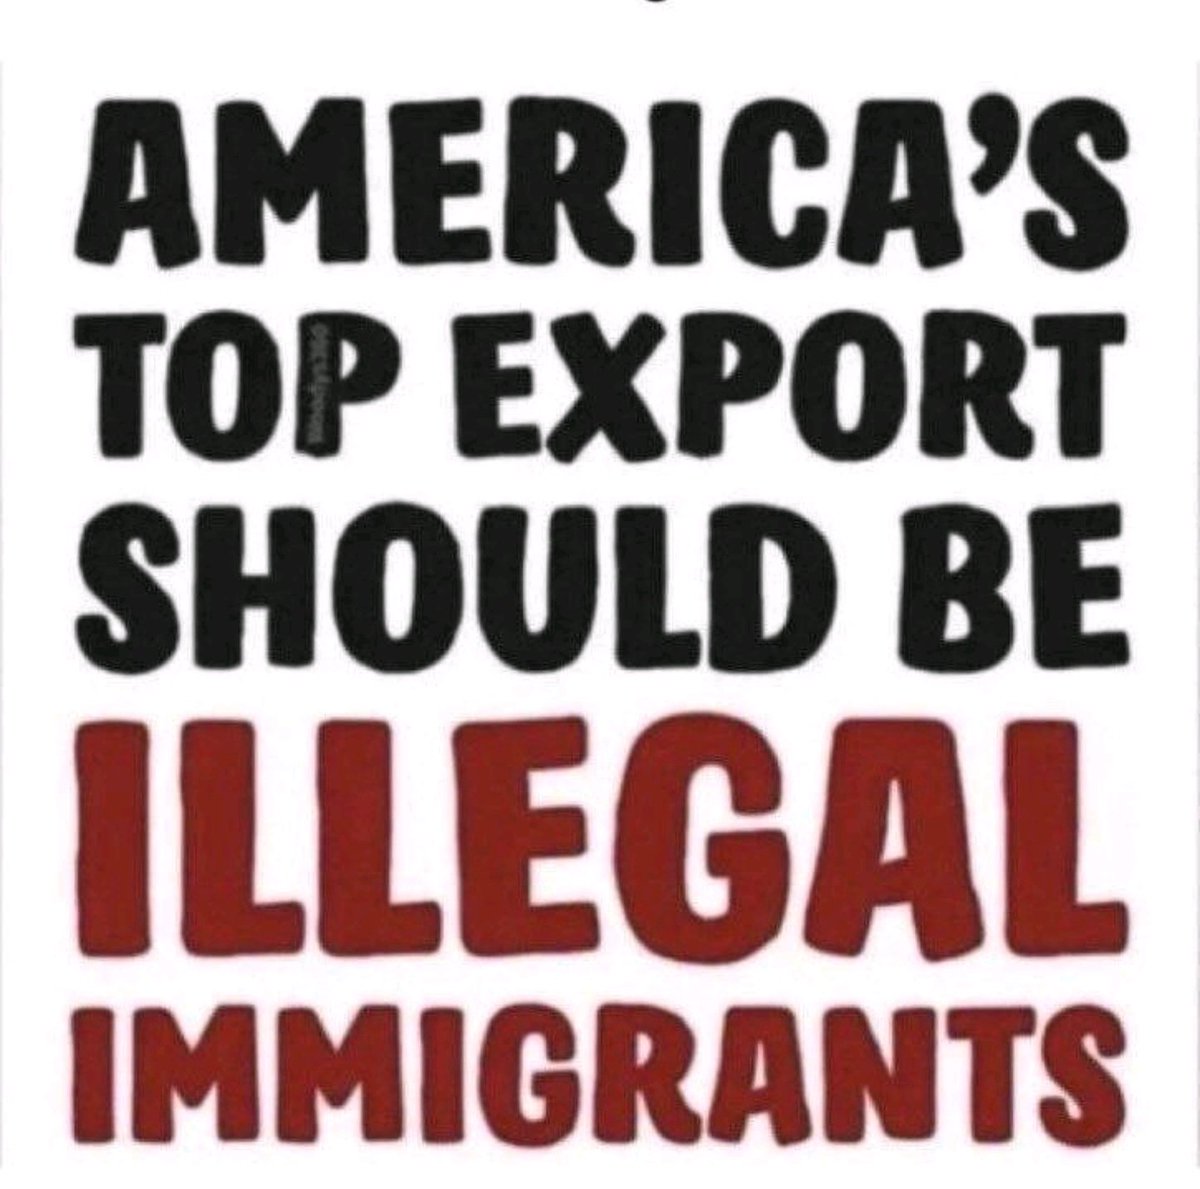 We need to get the #SouthernBorder under control. I have friends who live in border states #California, #Arizona,#Texas, and #NewMexico. They are telling me its not safe right now, I believe them.